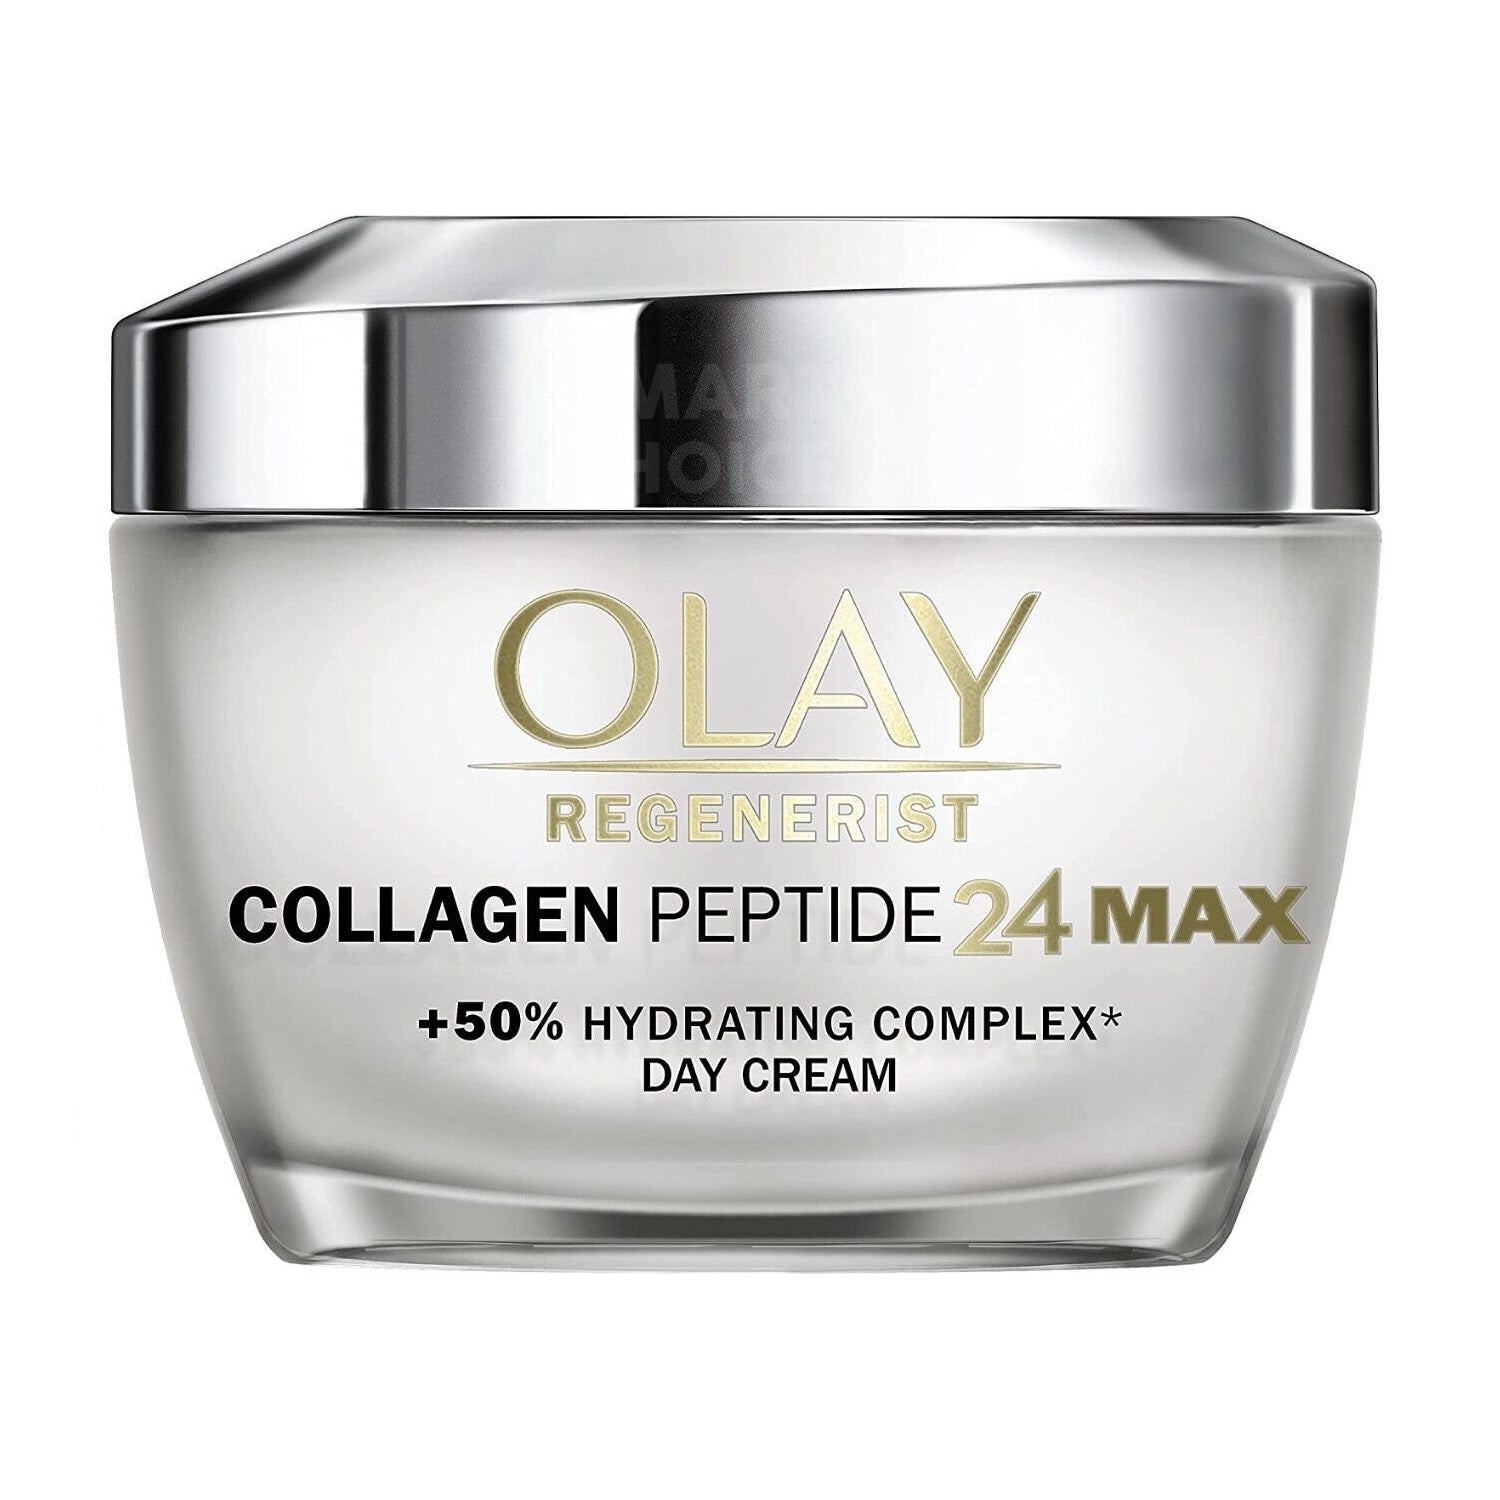 Olay Regenerist Collagen Peptide 24 Max + 50% Day Cream - LookincredibleOlay8006540501191